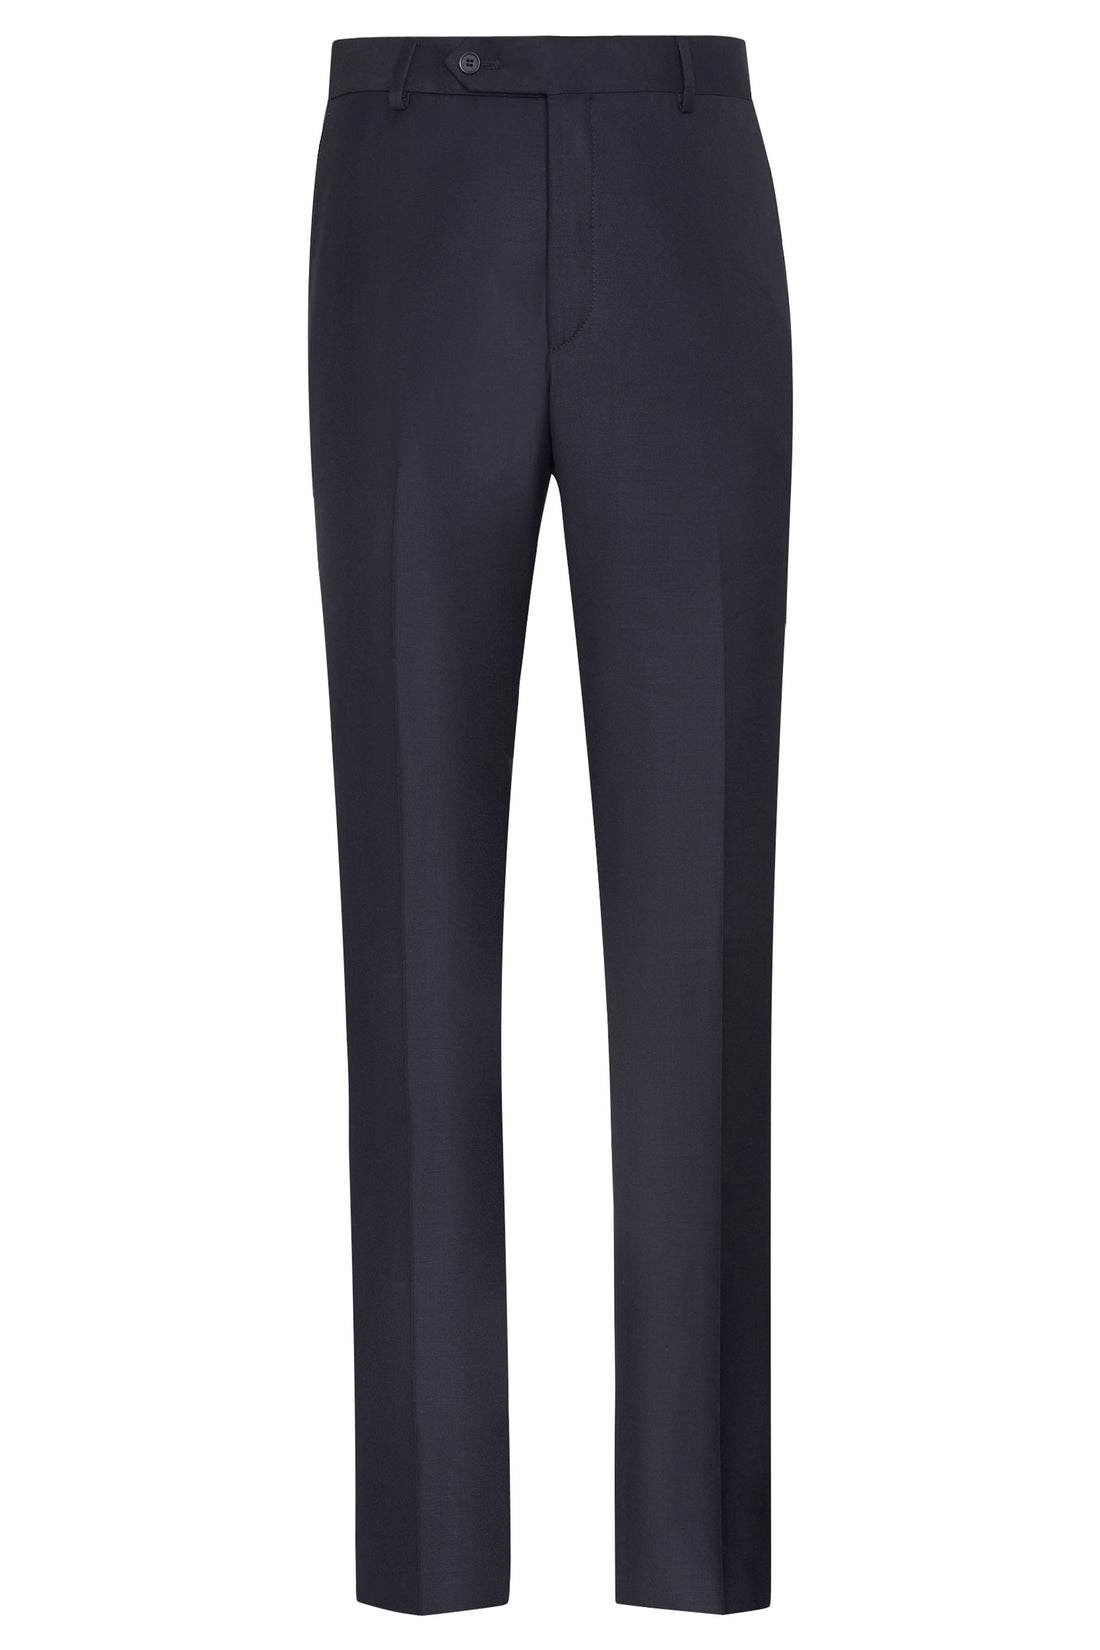 Navy Flat Front Trousers - Classic Fit